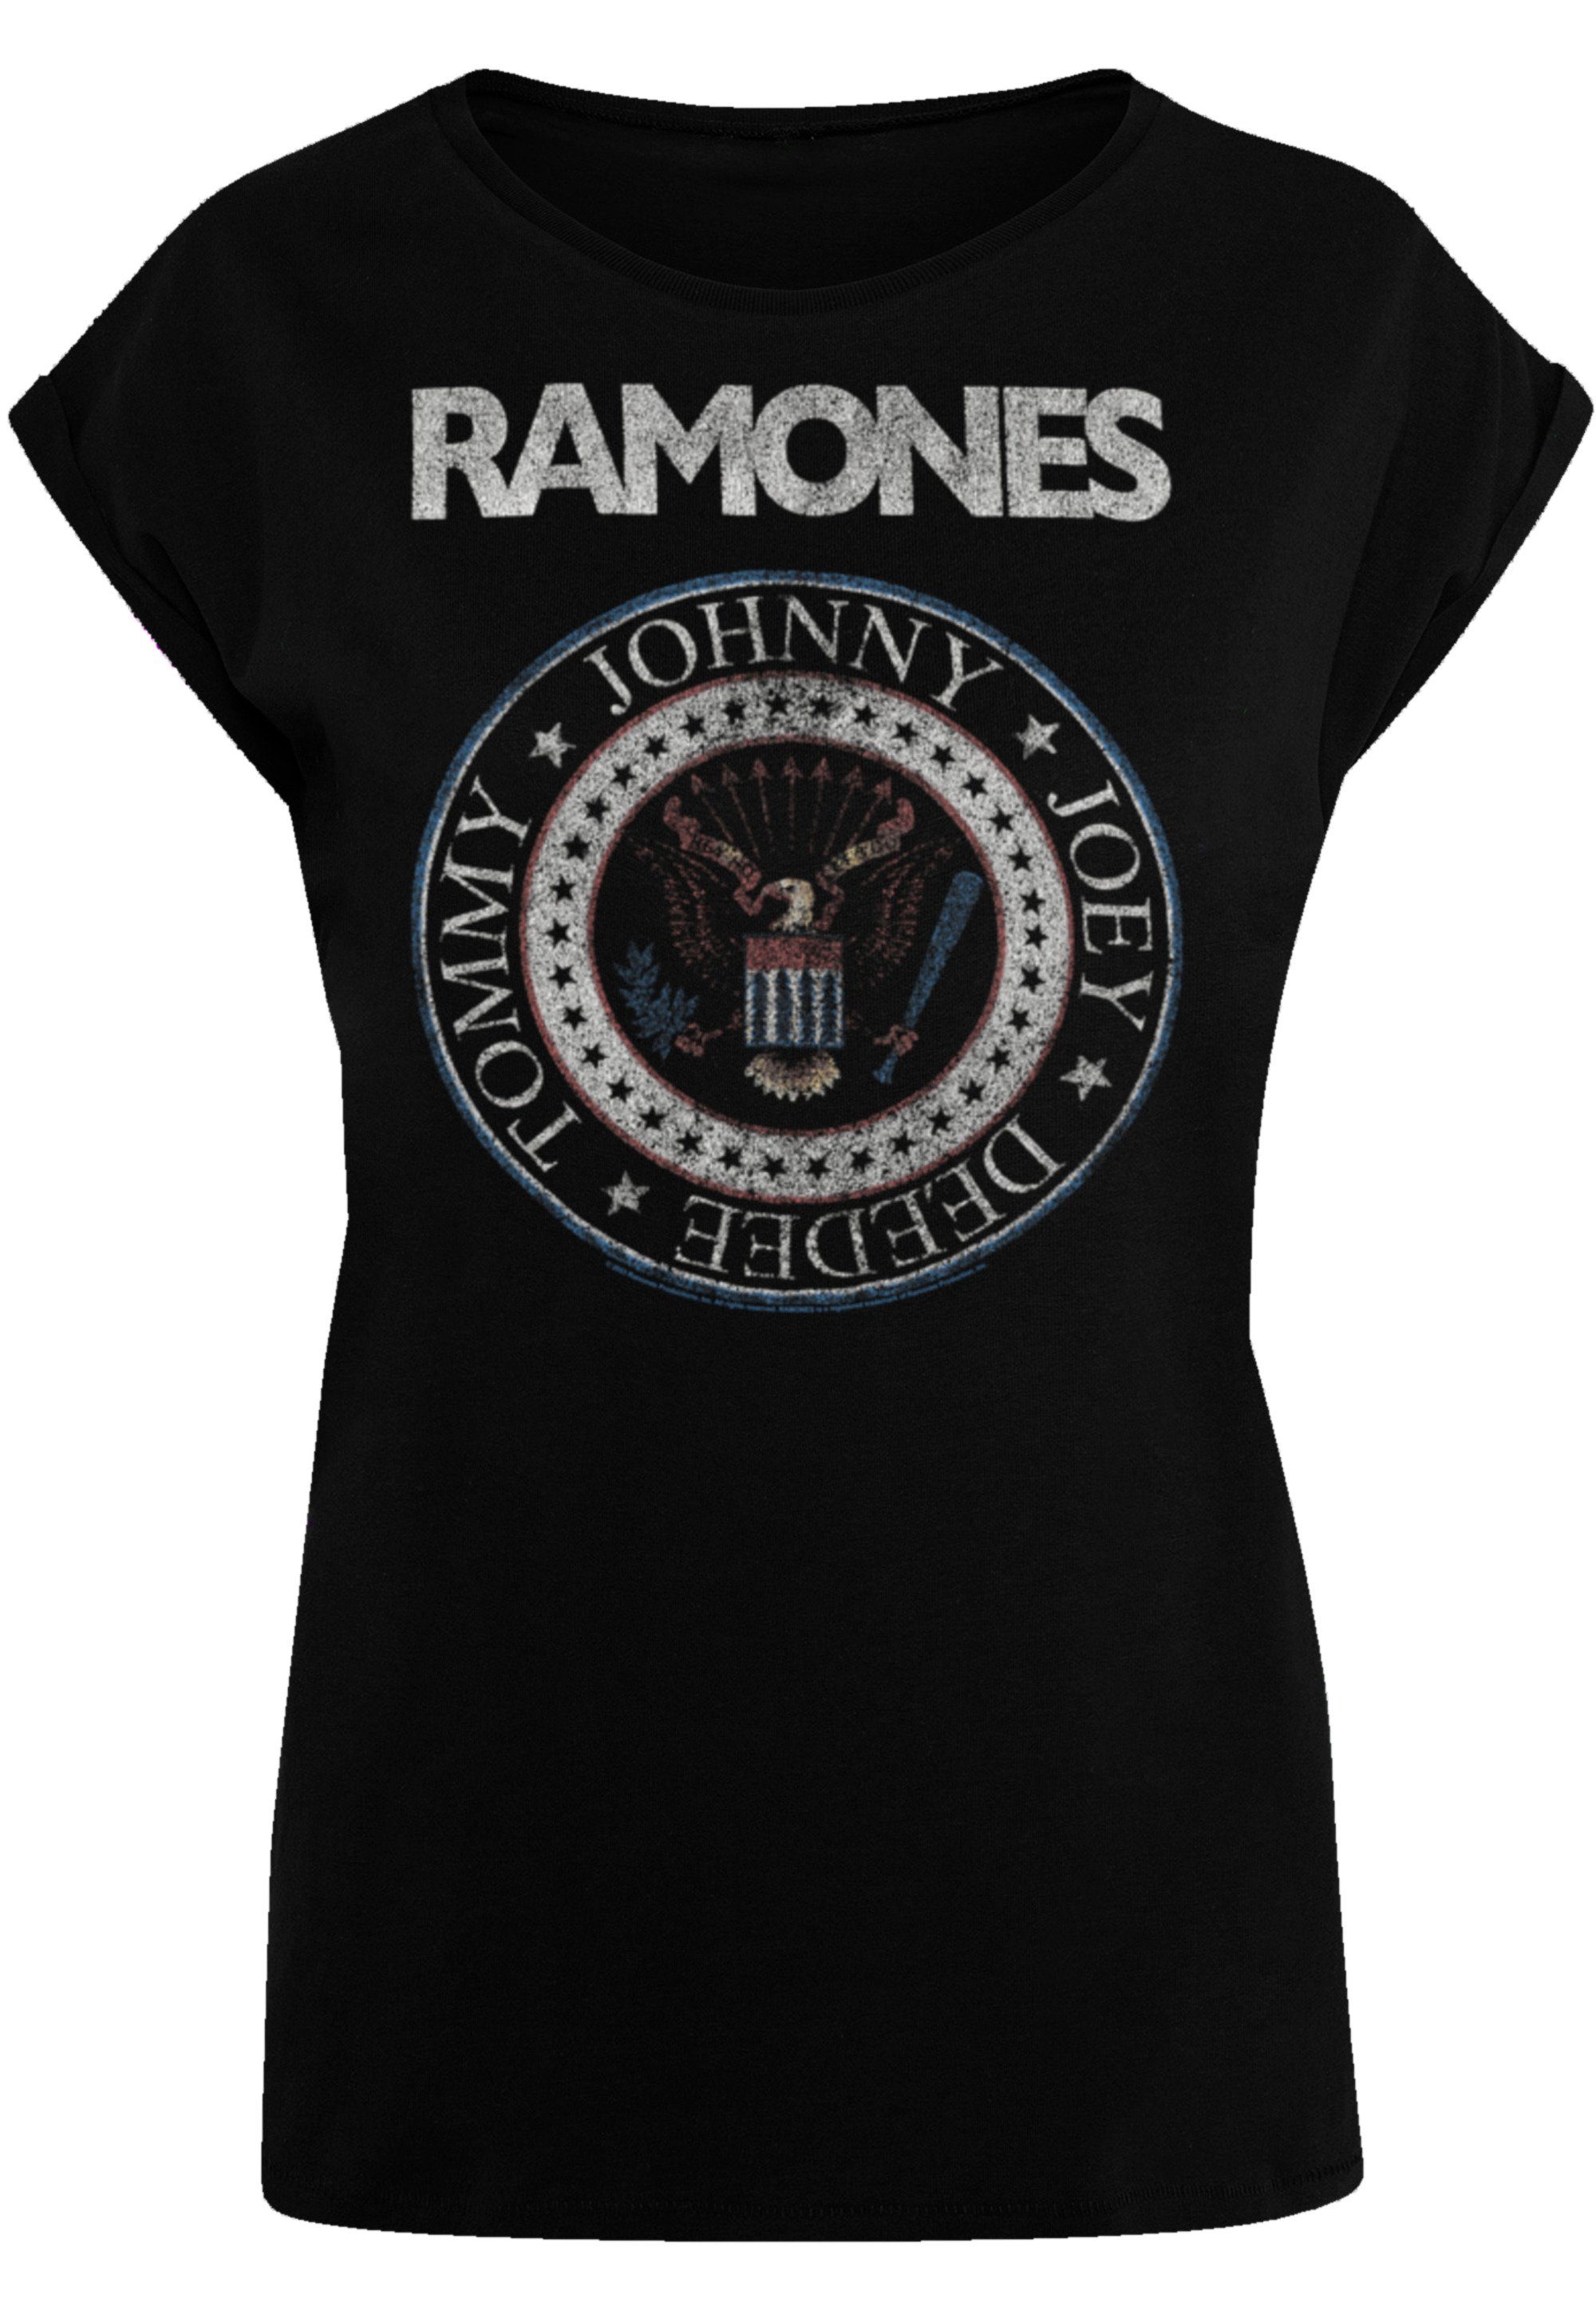 Qualität, F4NT4STIC Red Rock Band White Ramones Rock-Musik Seal Premium T-Shirt Band, And Musik